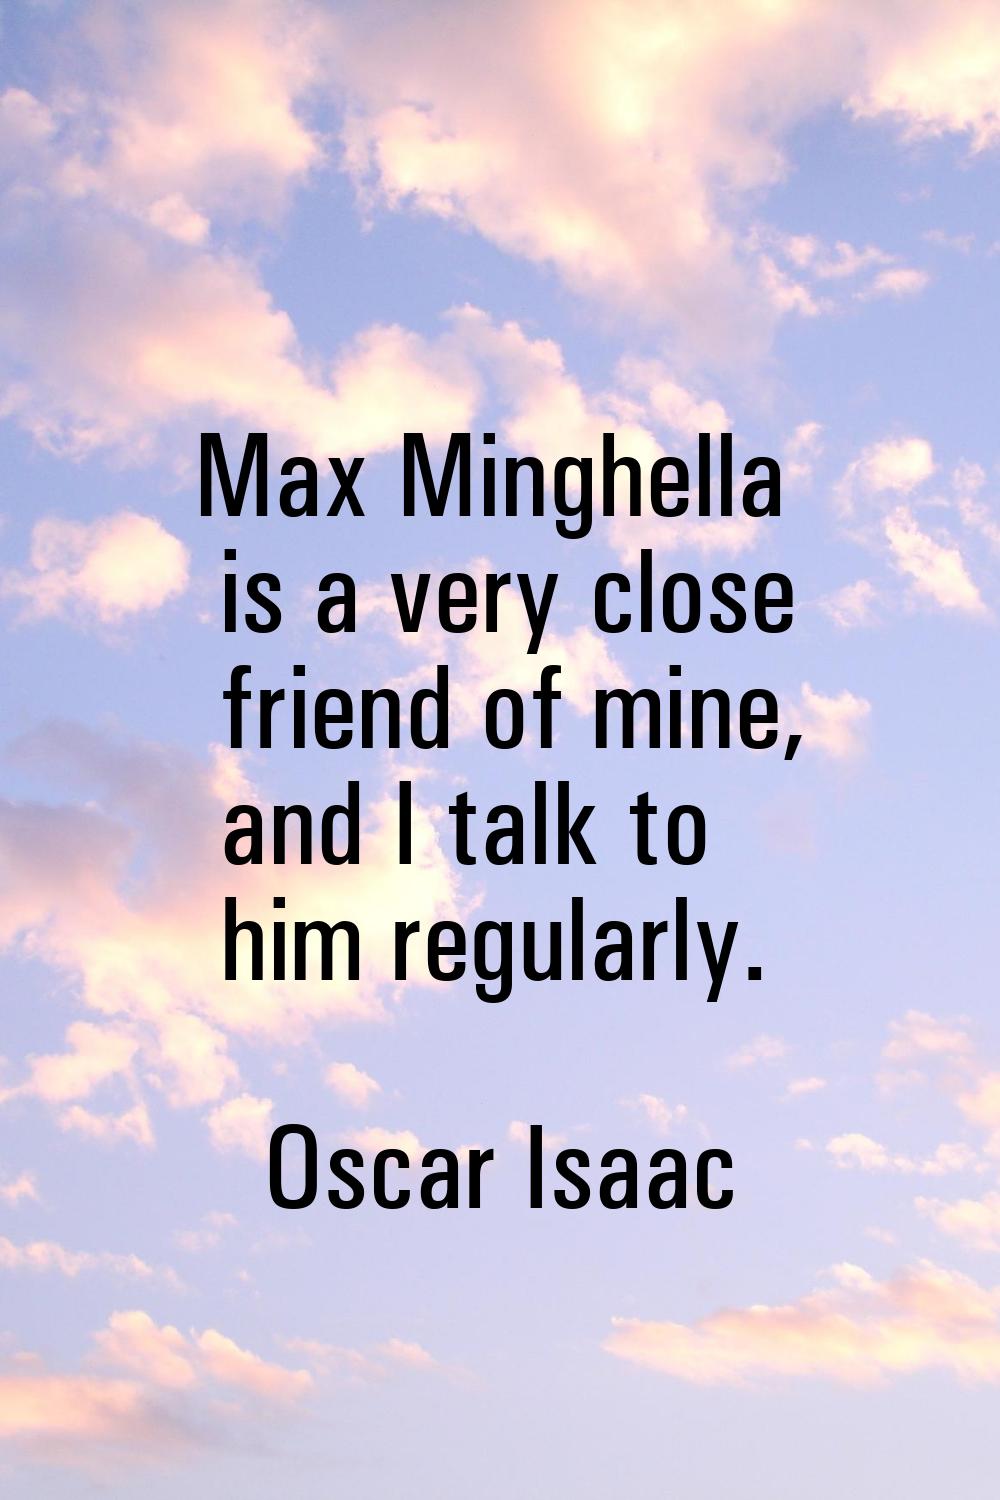 Max Minghella is a very close friend of mine, and I talk to him regularly.